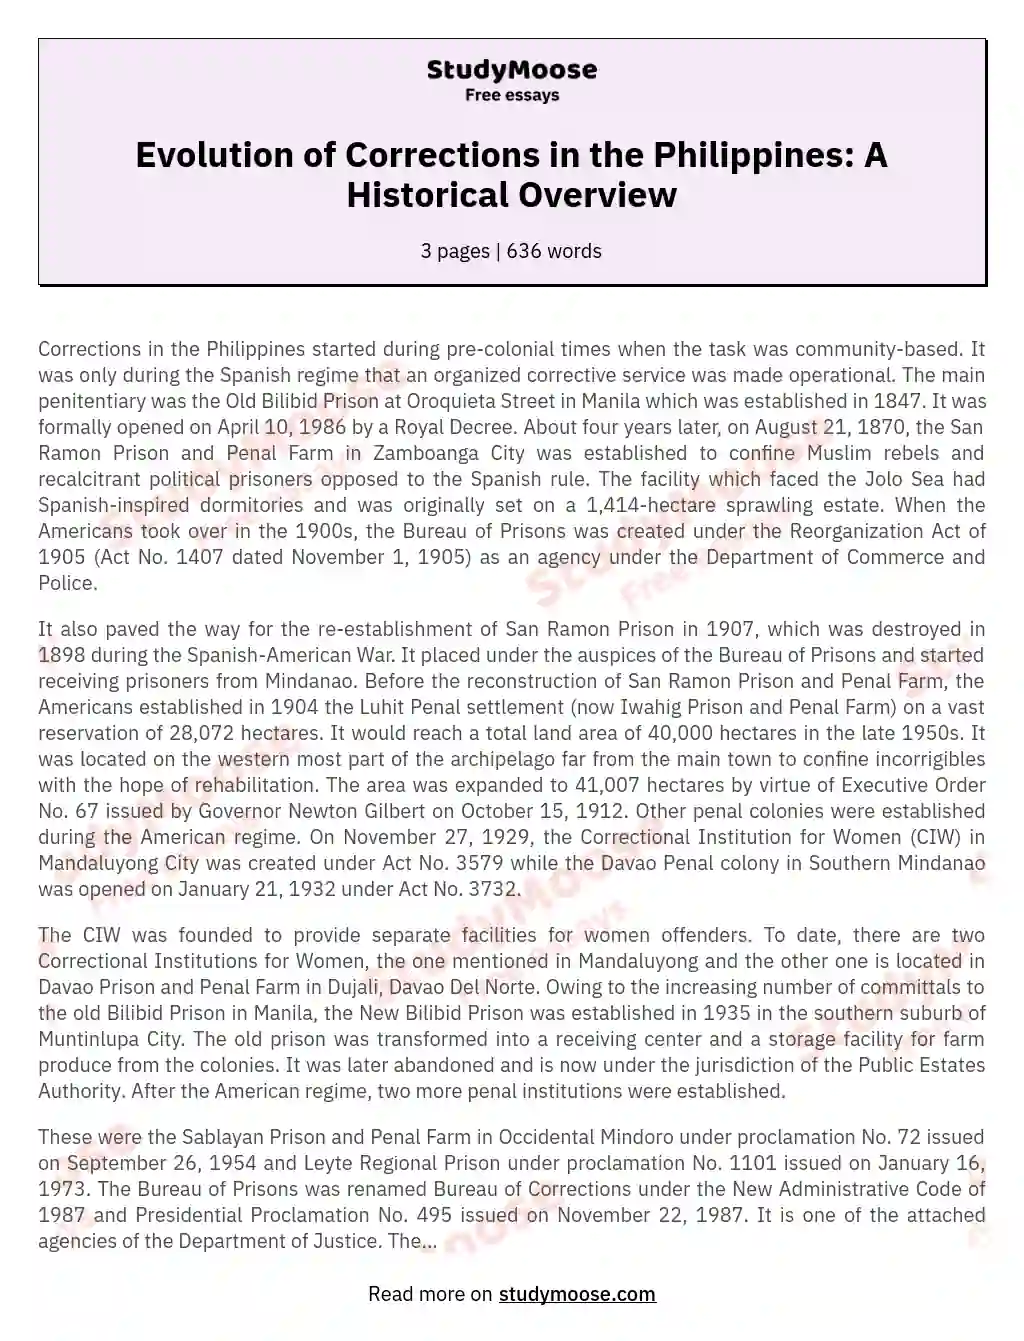 Evolution of Corrections in the Philippines: A Historical Overview essay